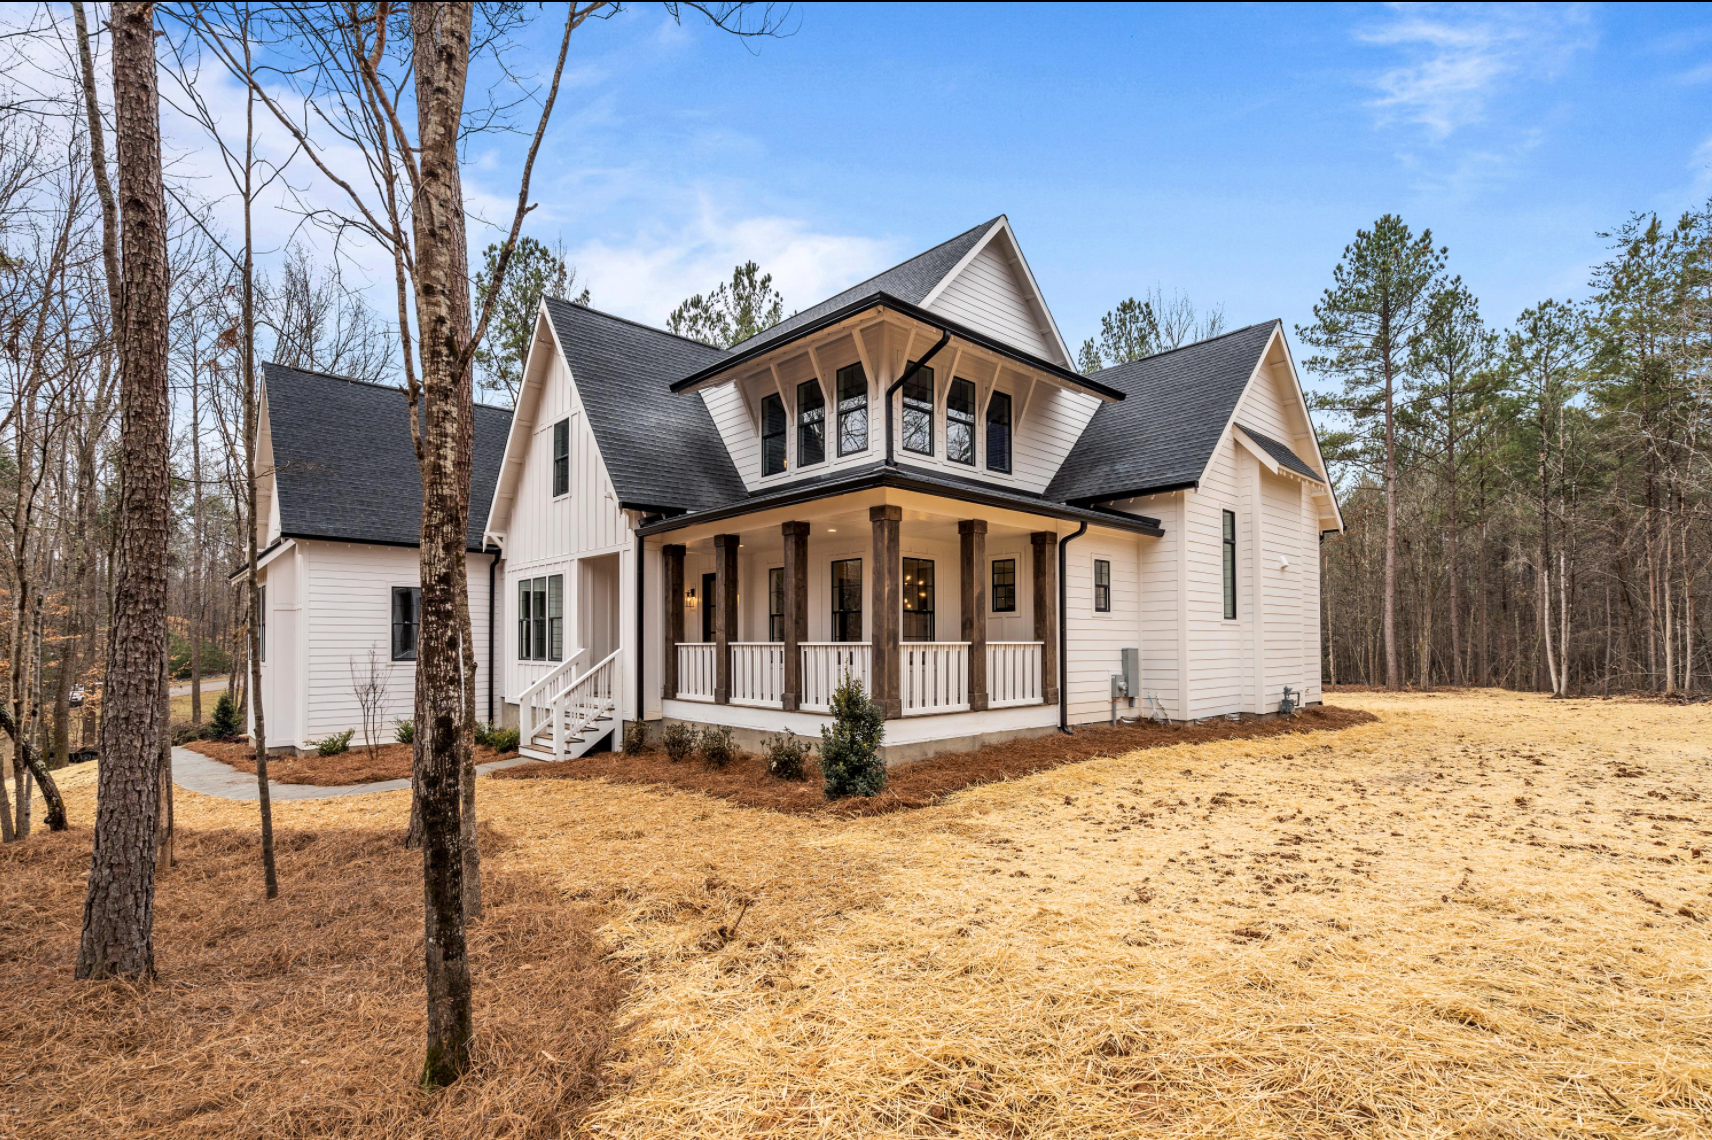 New construction homes in South Carolina continue throughout its suburban and surrounding areas as new investment opportunities emerge.